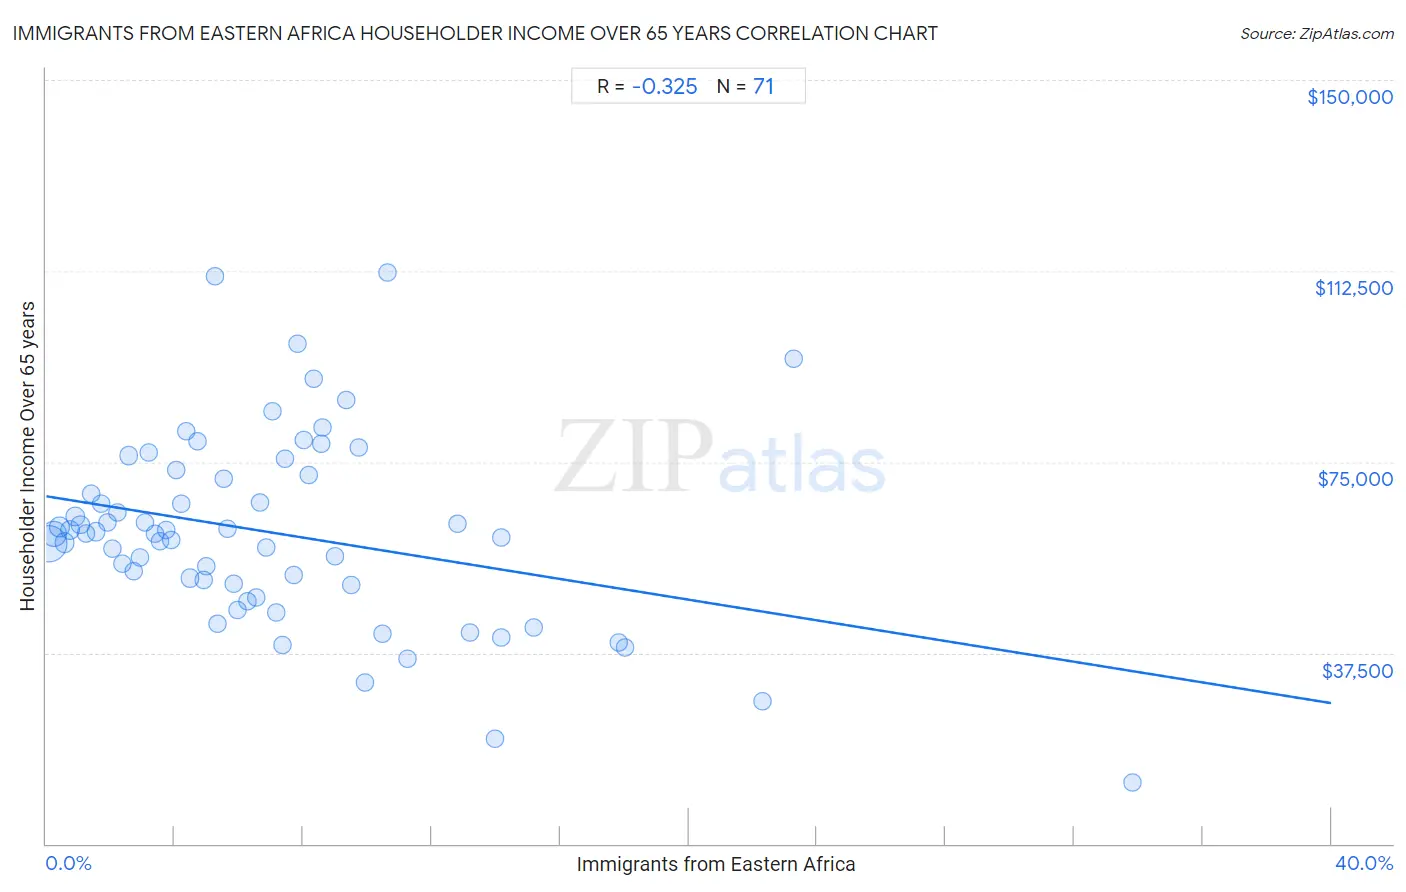 Immigrants from Eastern Africa Householder Income Over 65 years